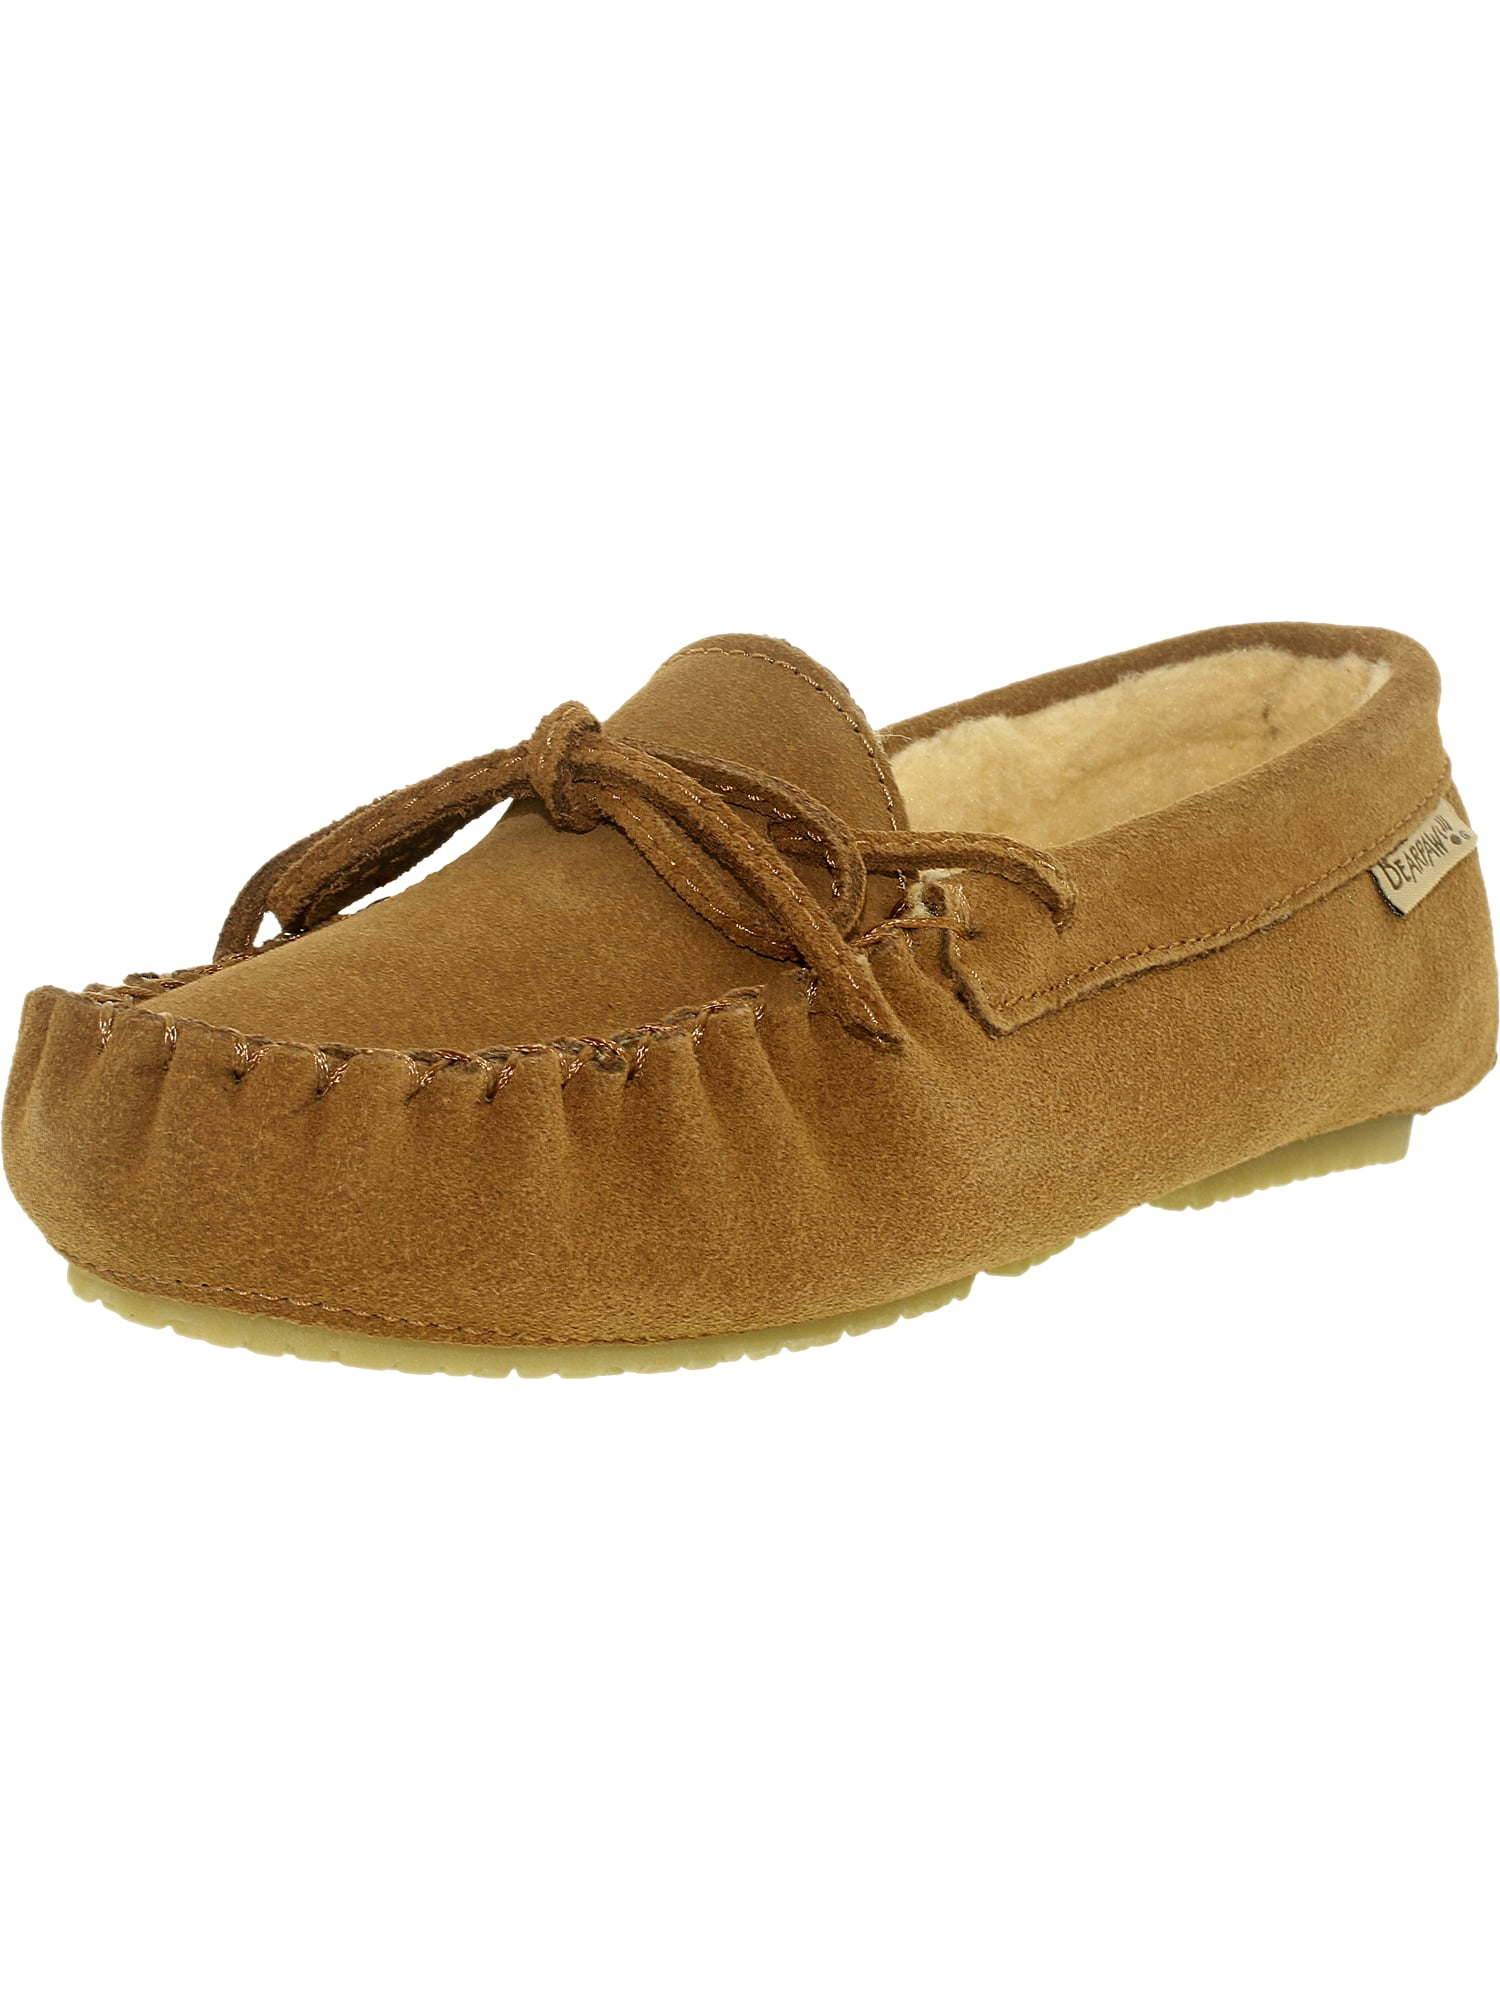 Bearpaw Women's Ashlynn Hickory Ankle-High Suede Moccasins - 7M ...